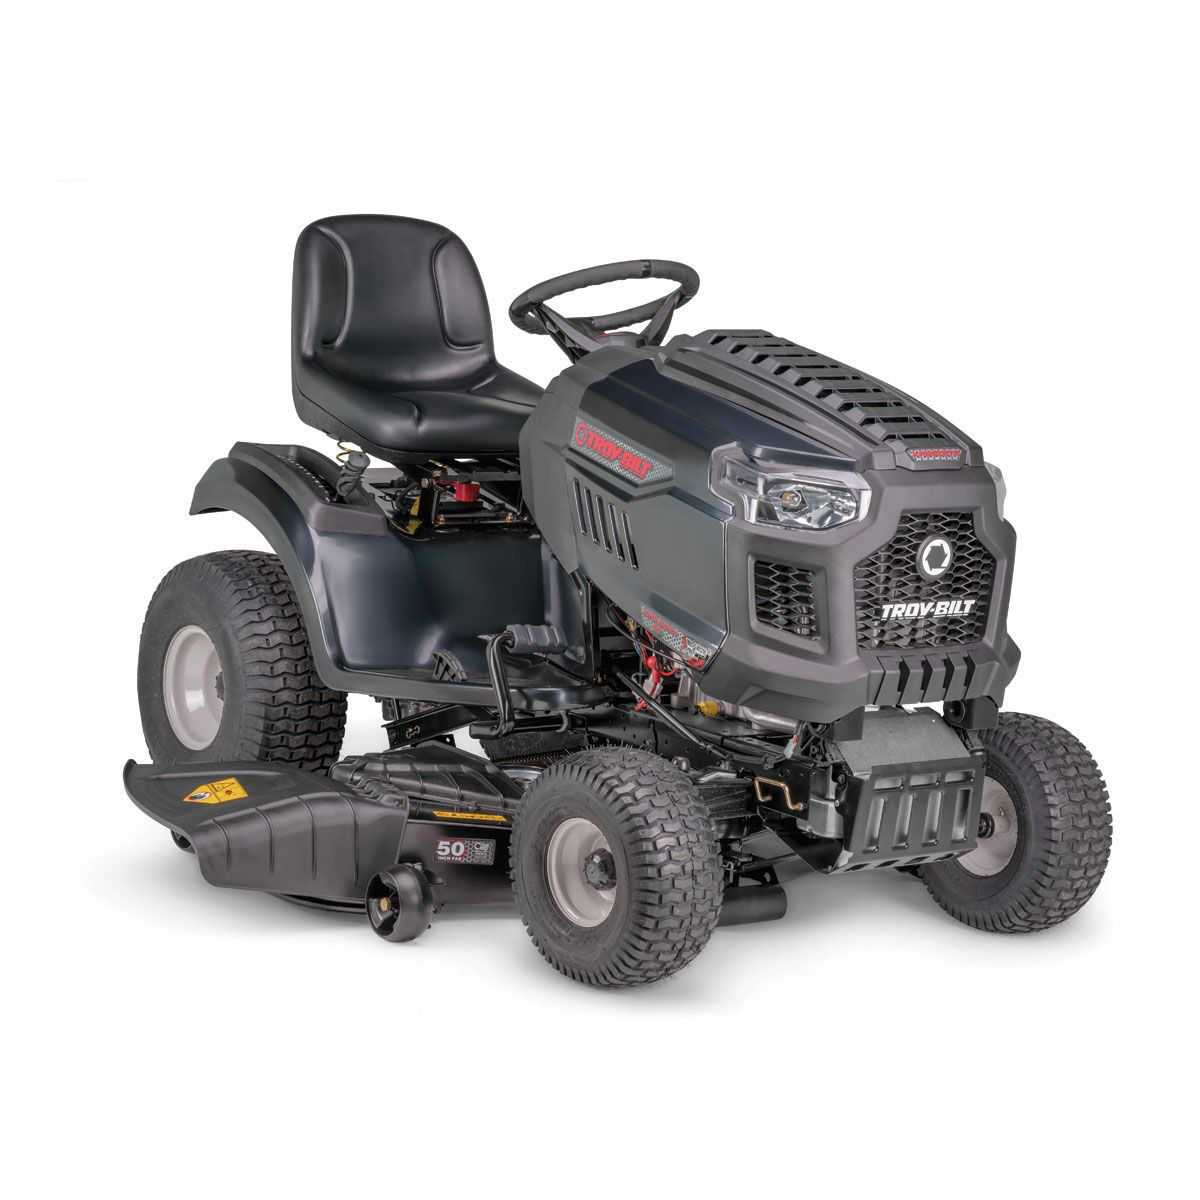 Image of Troy-Bilt 50” Hydro Lawn Tractor